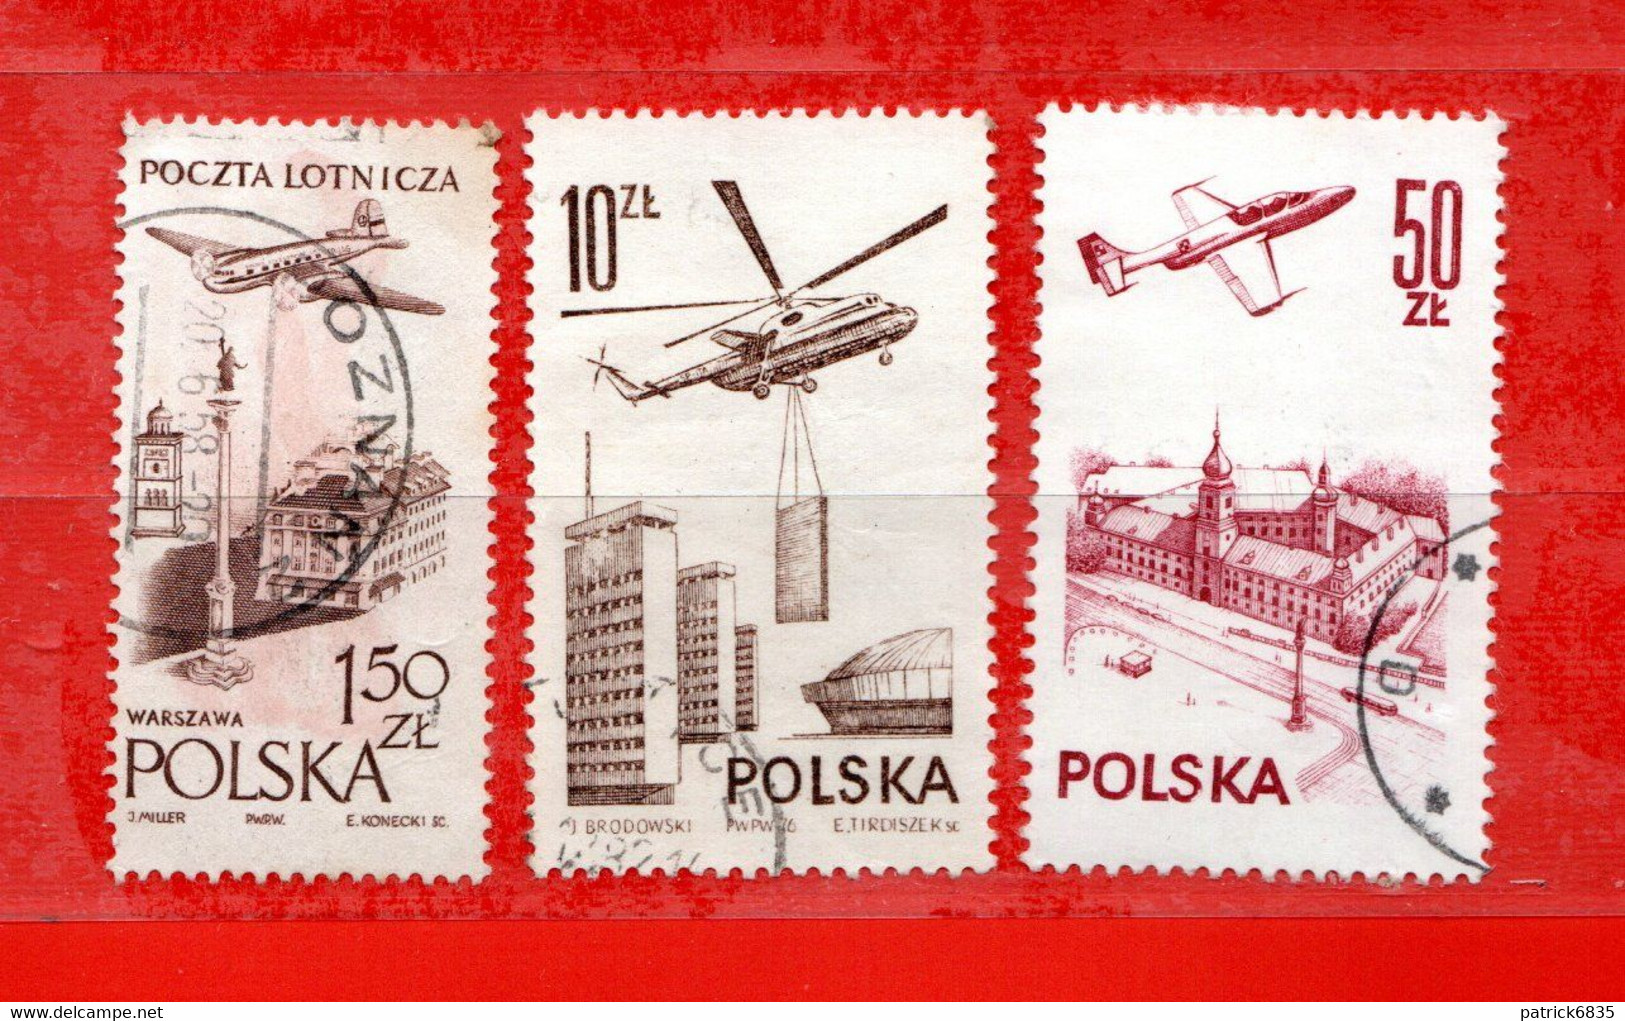 (Us.5) POLONIA ° - AIRMAIL - 1957 à 1978 - AVIONS.  Yv. 42-56-58.  Oblitéré Come Scansione - Used Stamps